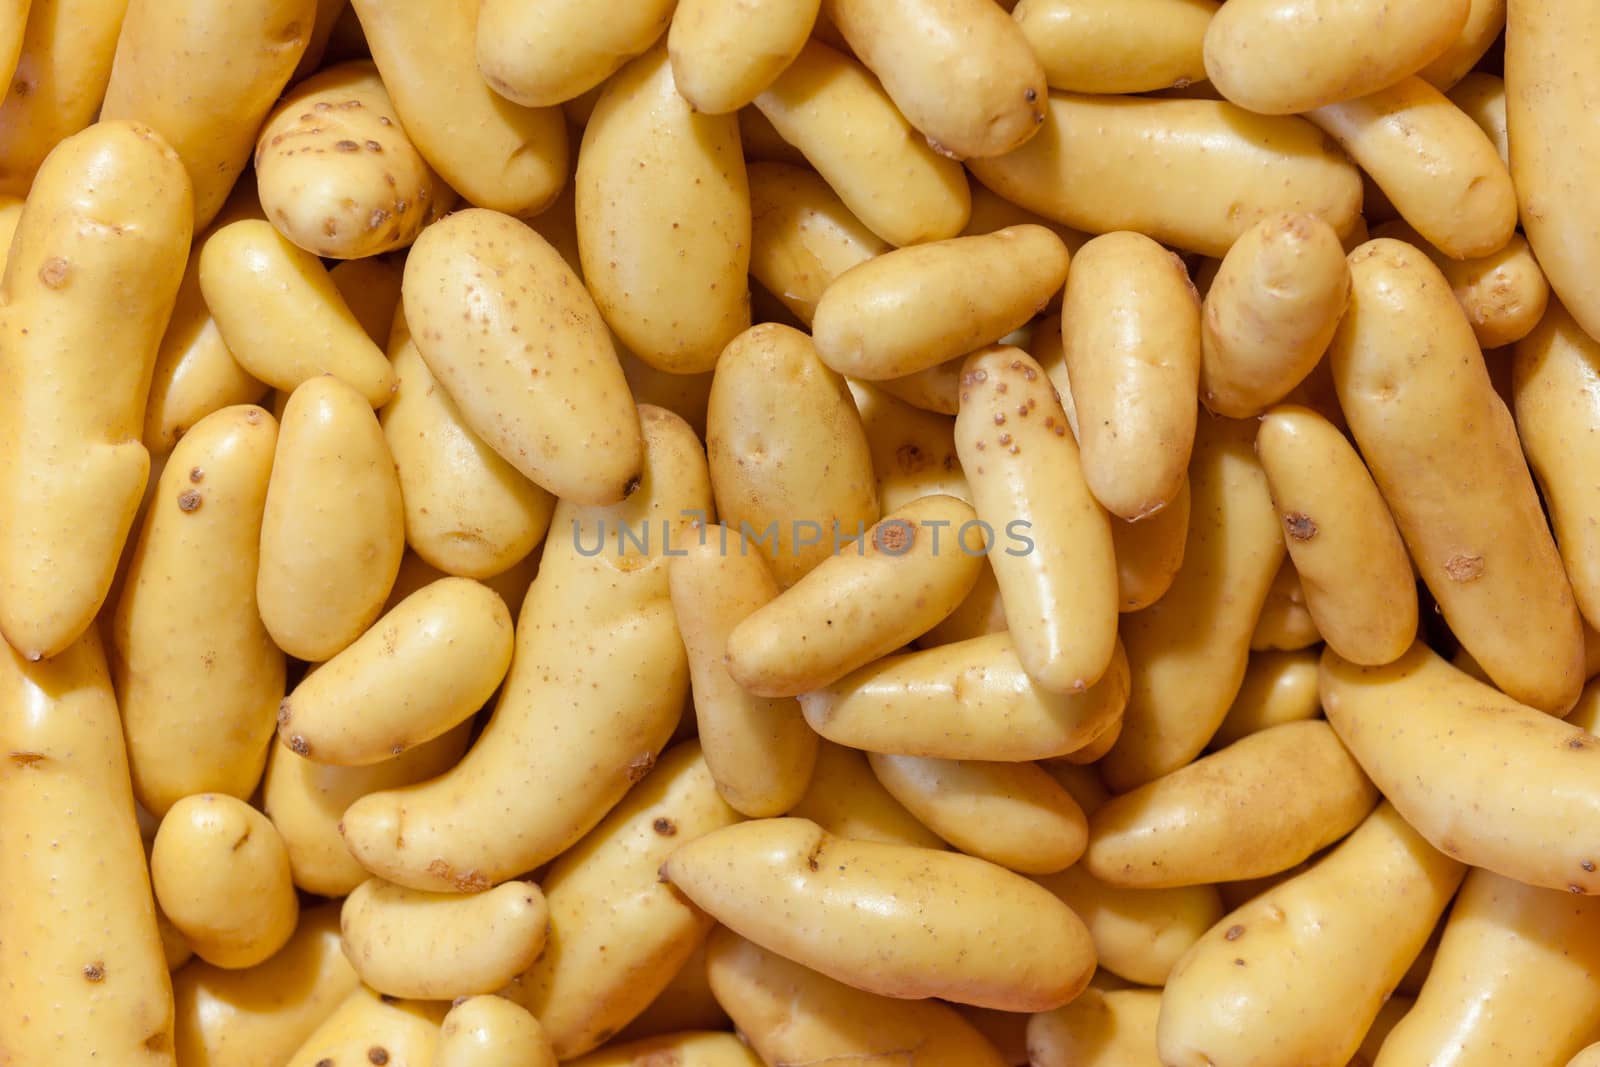 Fresh harvest of Russian Banana Fingerling Potatoes as a raw food farming agriculture background texture pattern